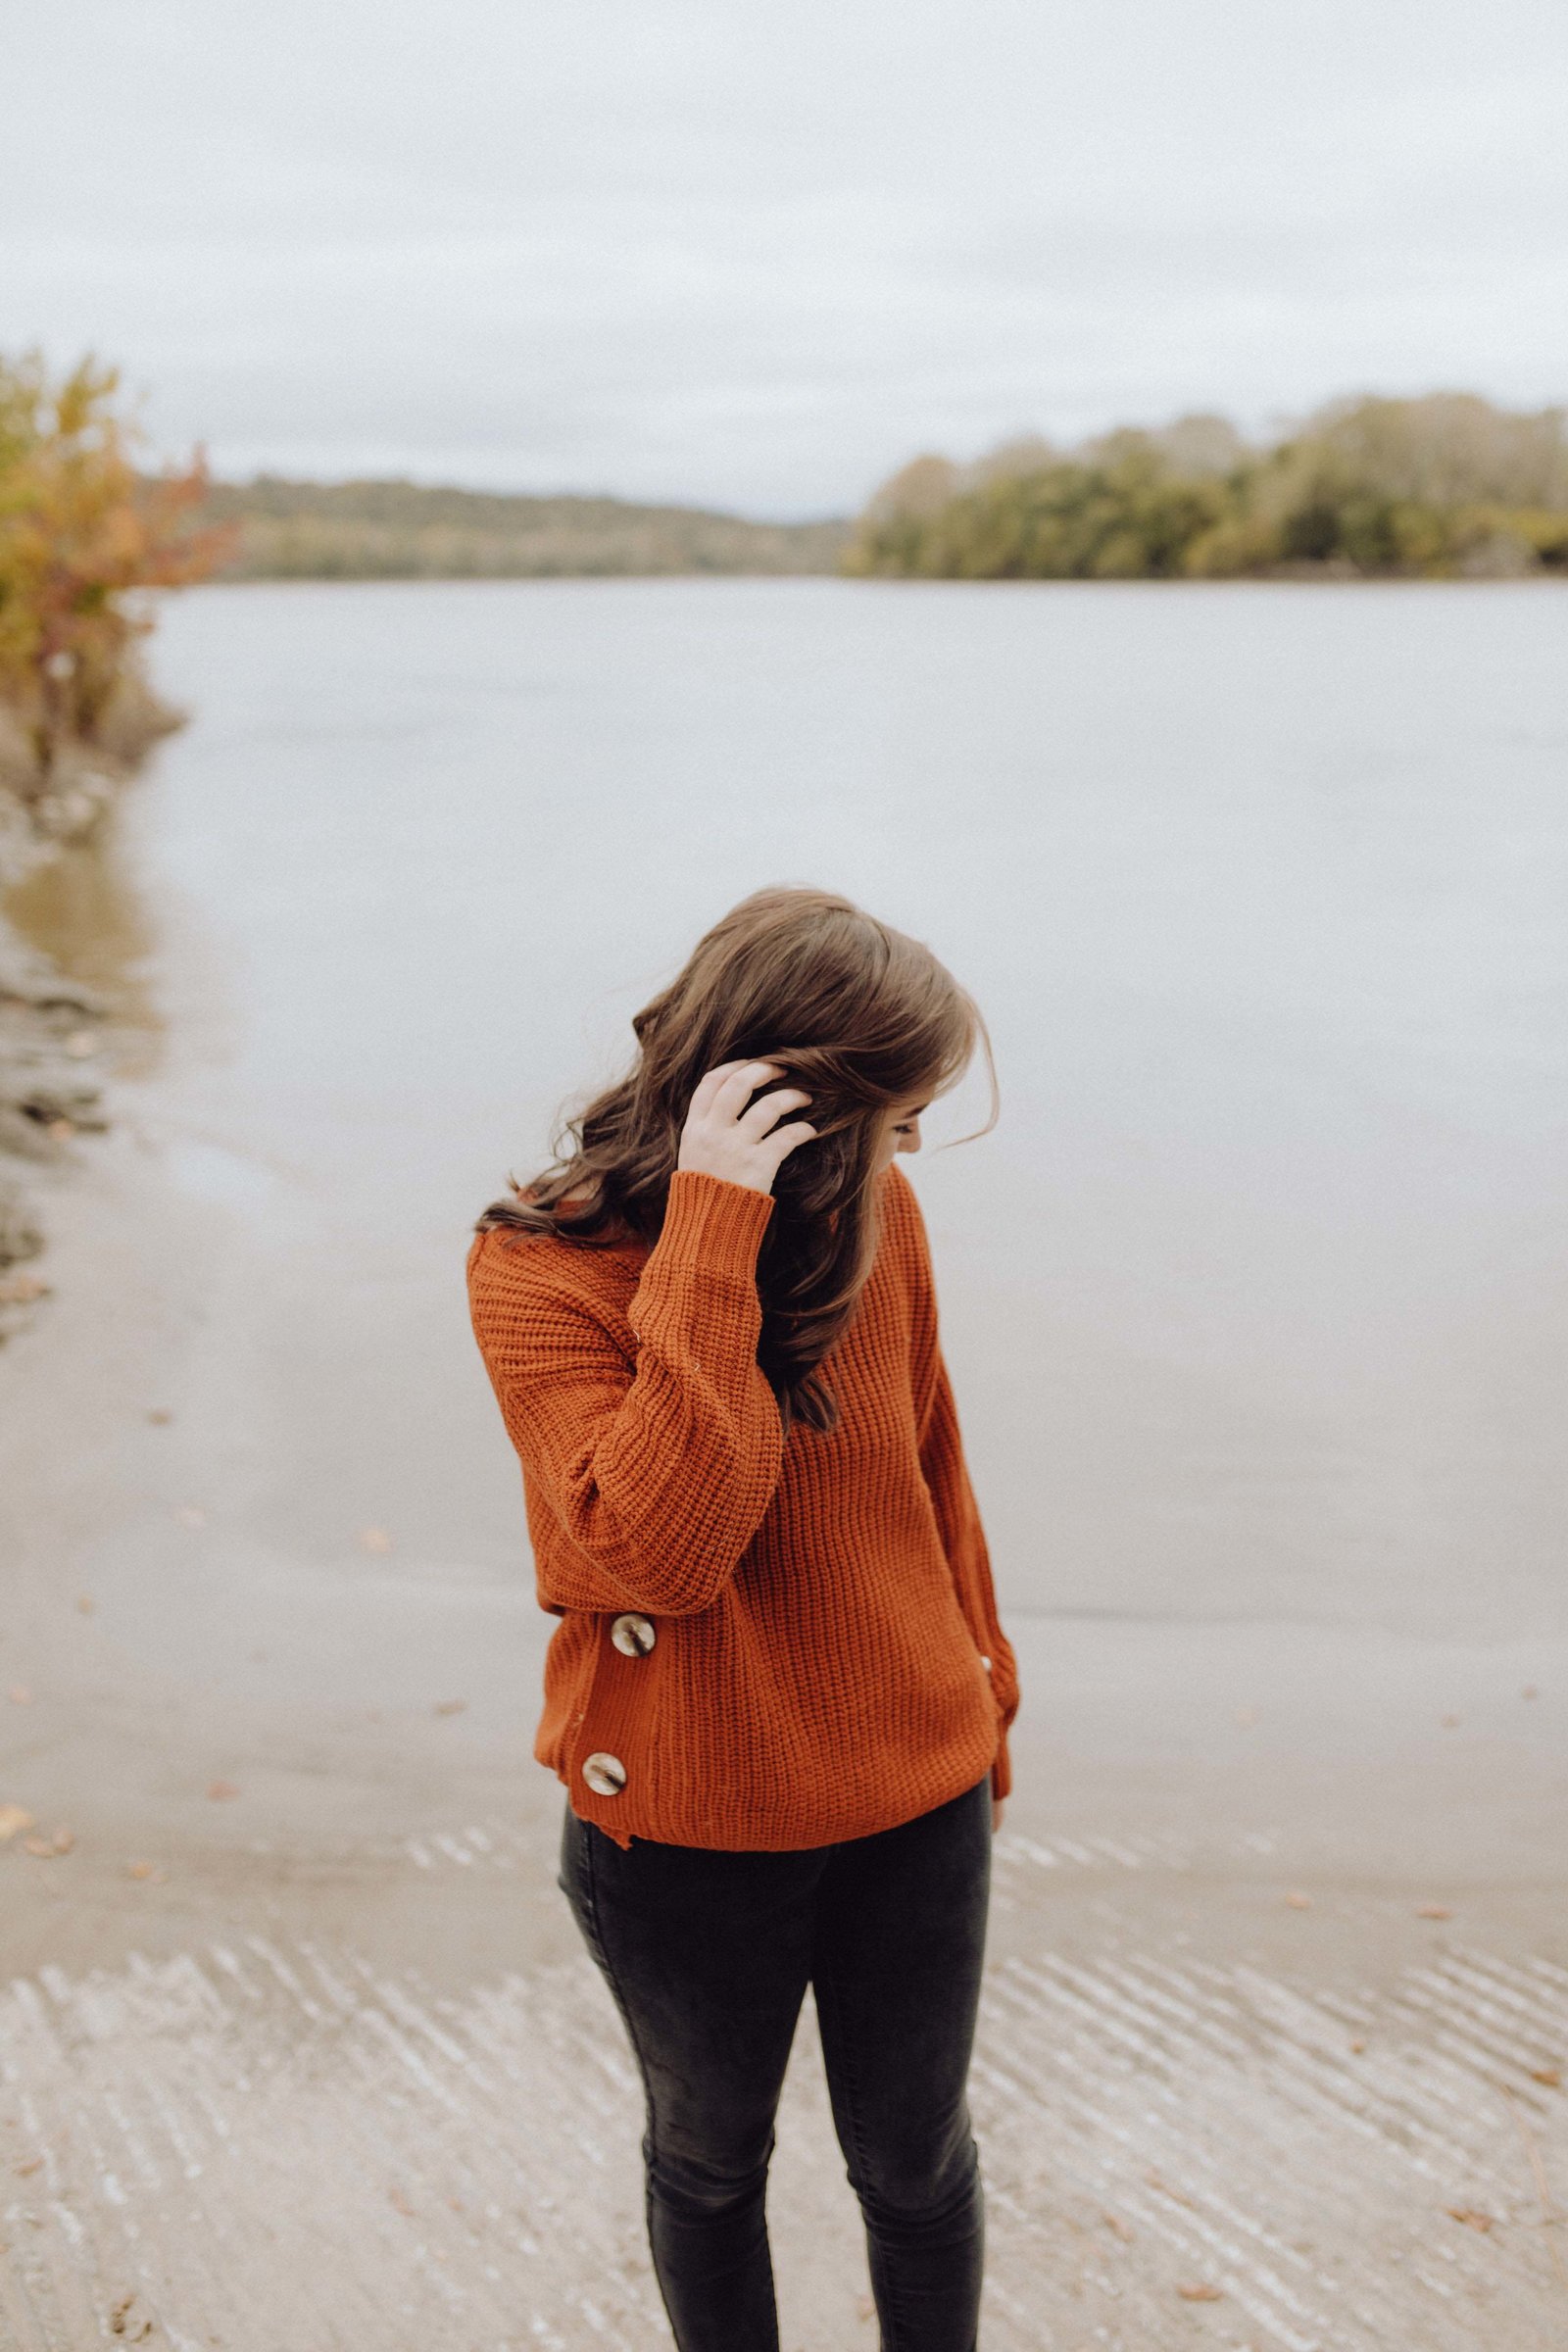 Girl is standing by river water, hand in her hair and looking at water.